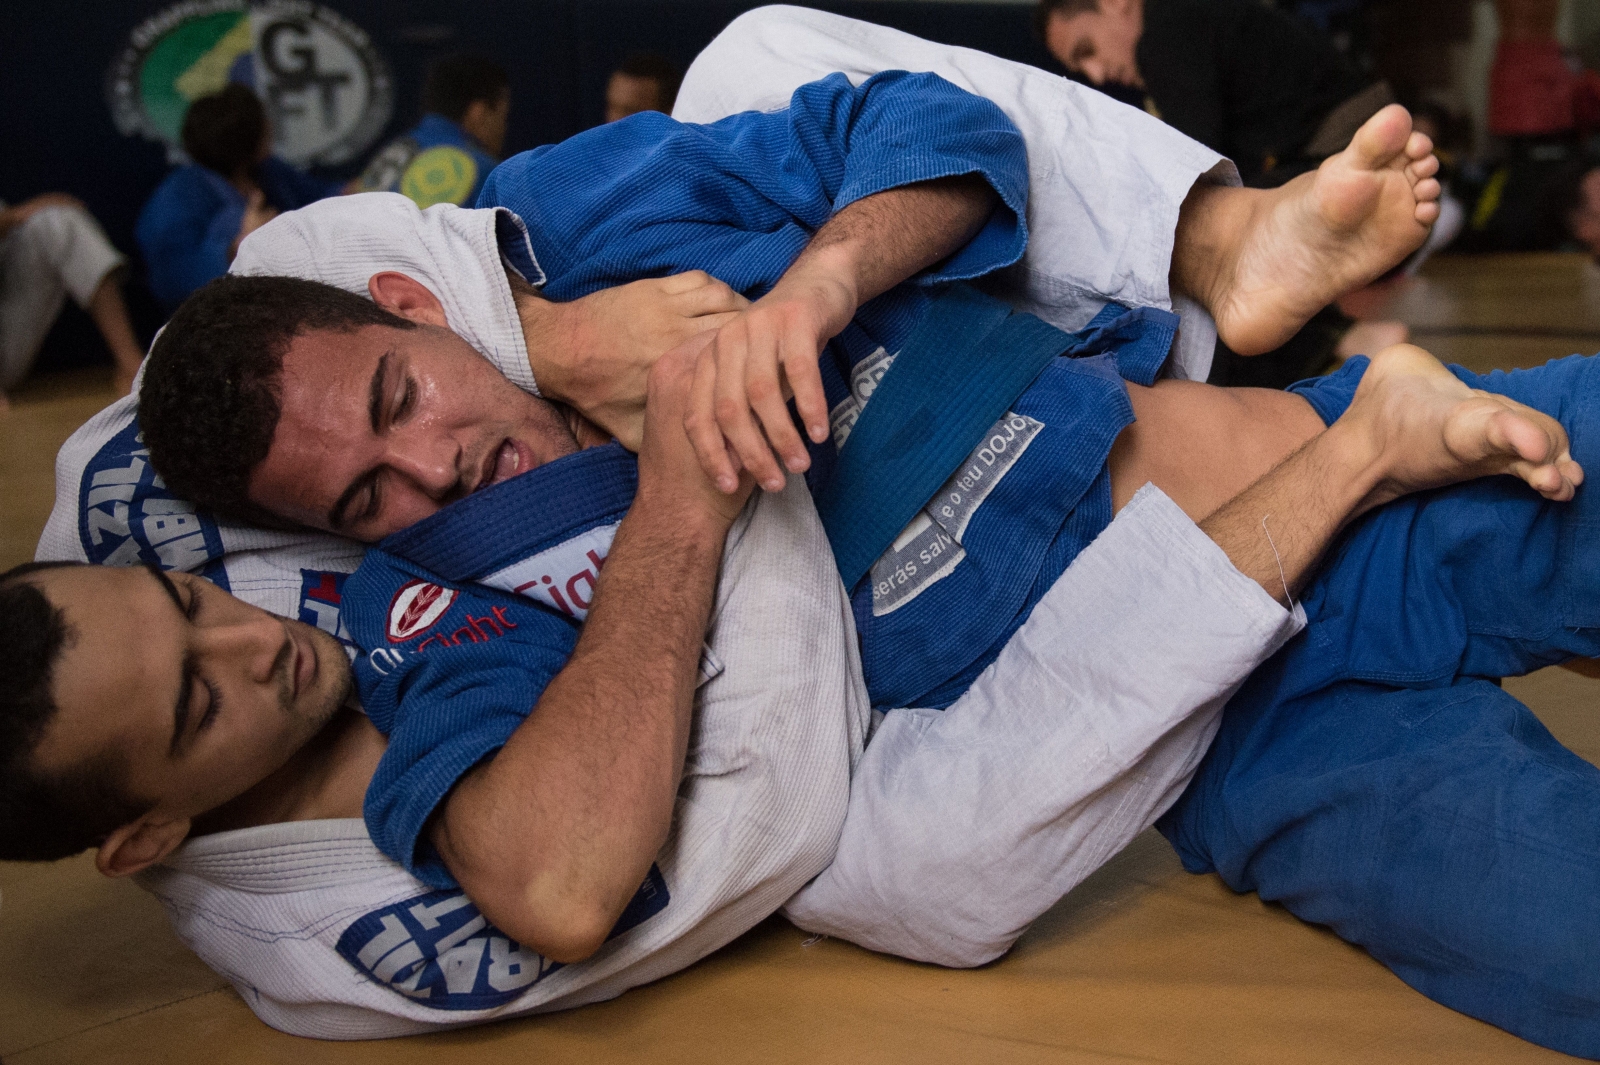 Canadian jiujitsu championship cancelled because fighting is illegal